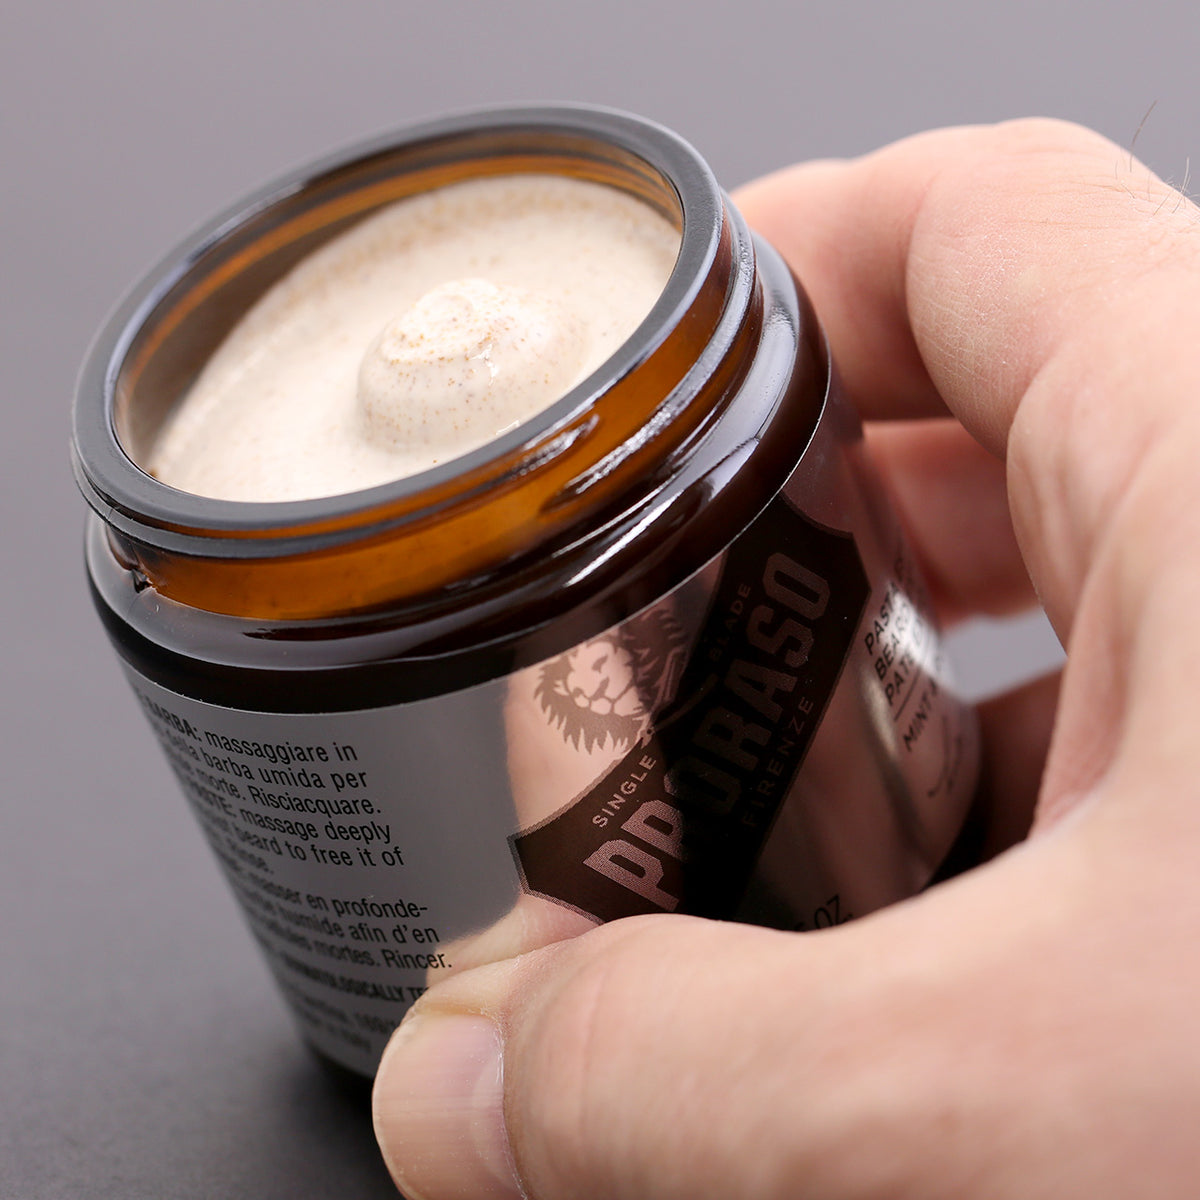 Proraso Beard Exfoliant - a view of the product inside the open jar held in a man&#39;s hand